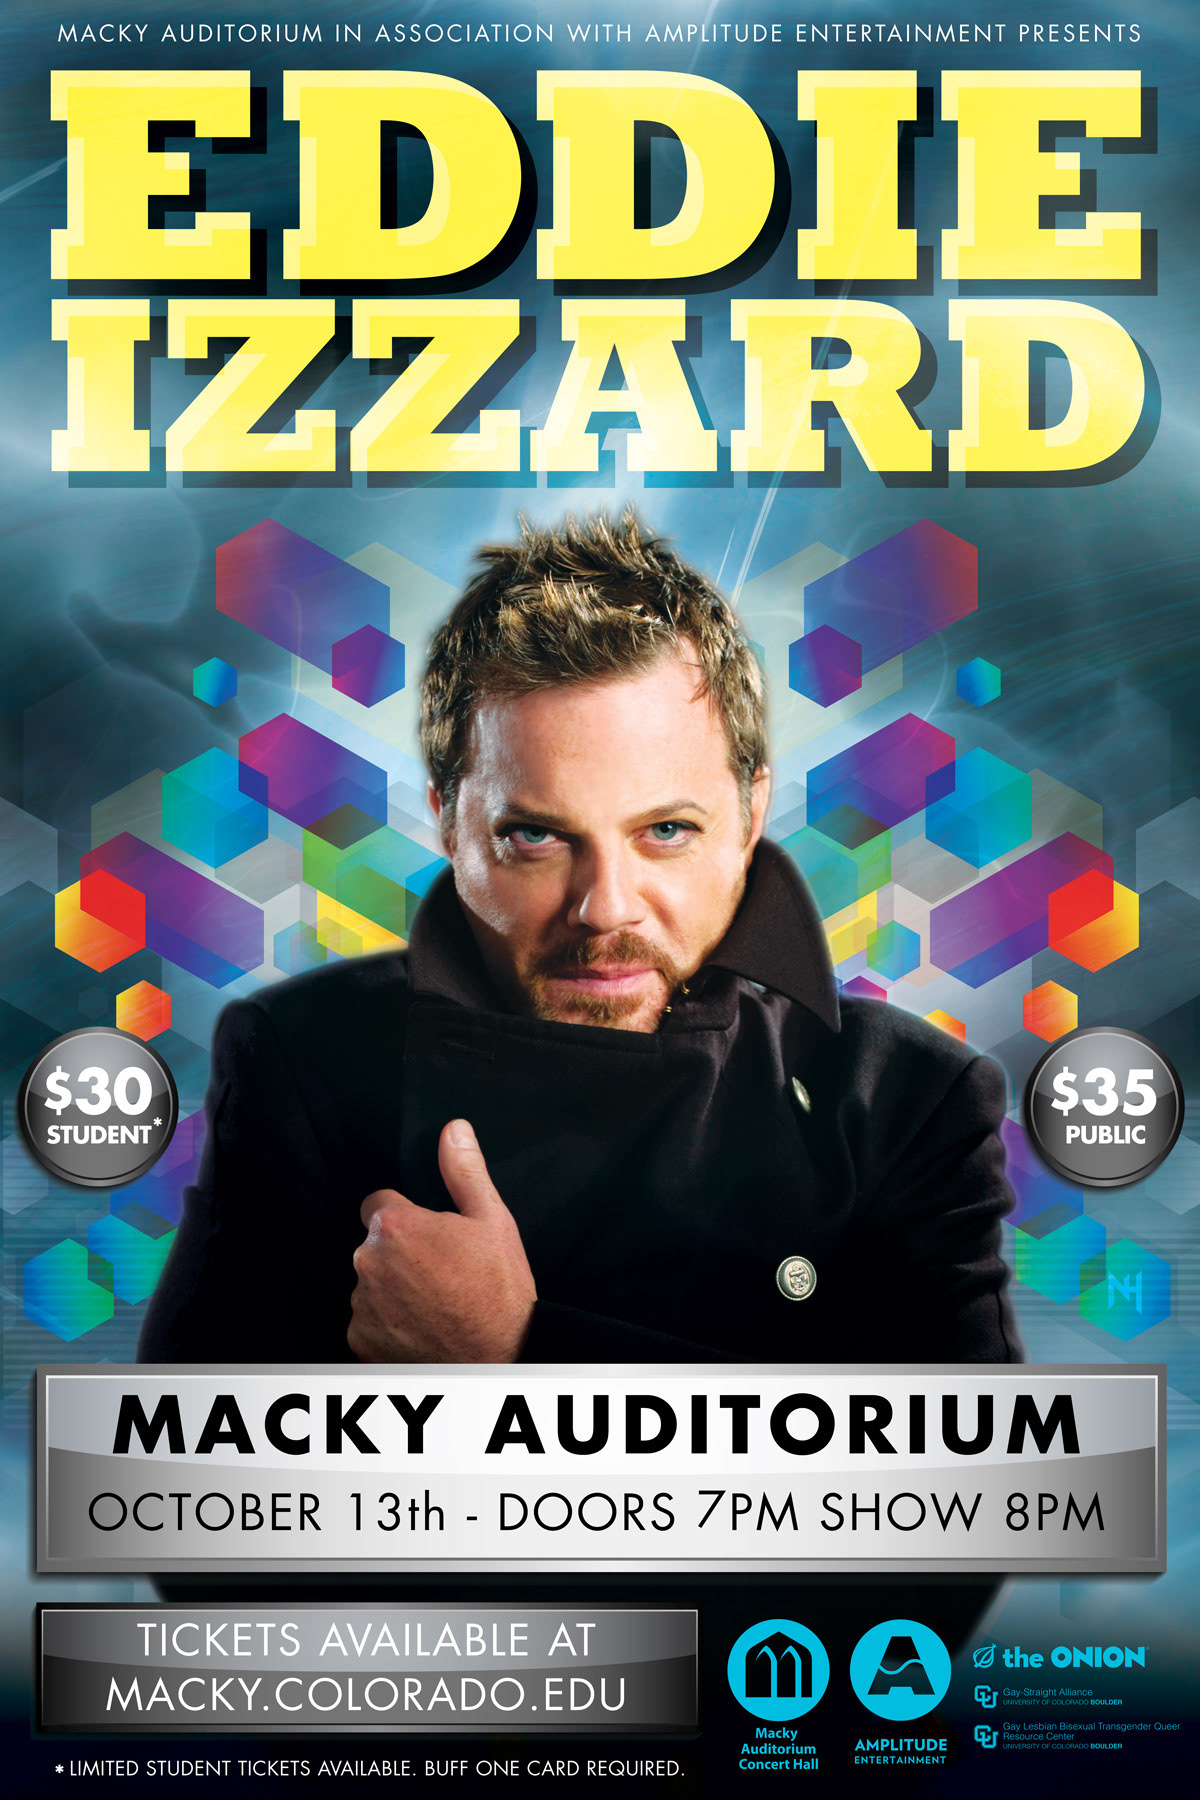 nick hess eddie izzard Live Comedy amplitude entertainment macky auditorium cu boulder University of Colorado poster print light effects vector Poster and visual graphics for the Eddie Izzard live comedy performance at